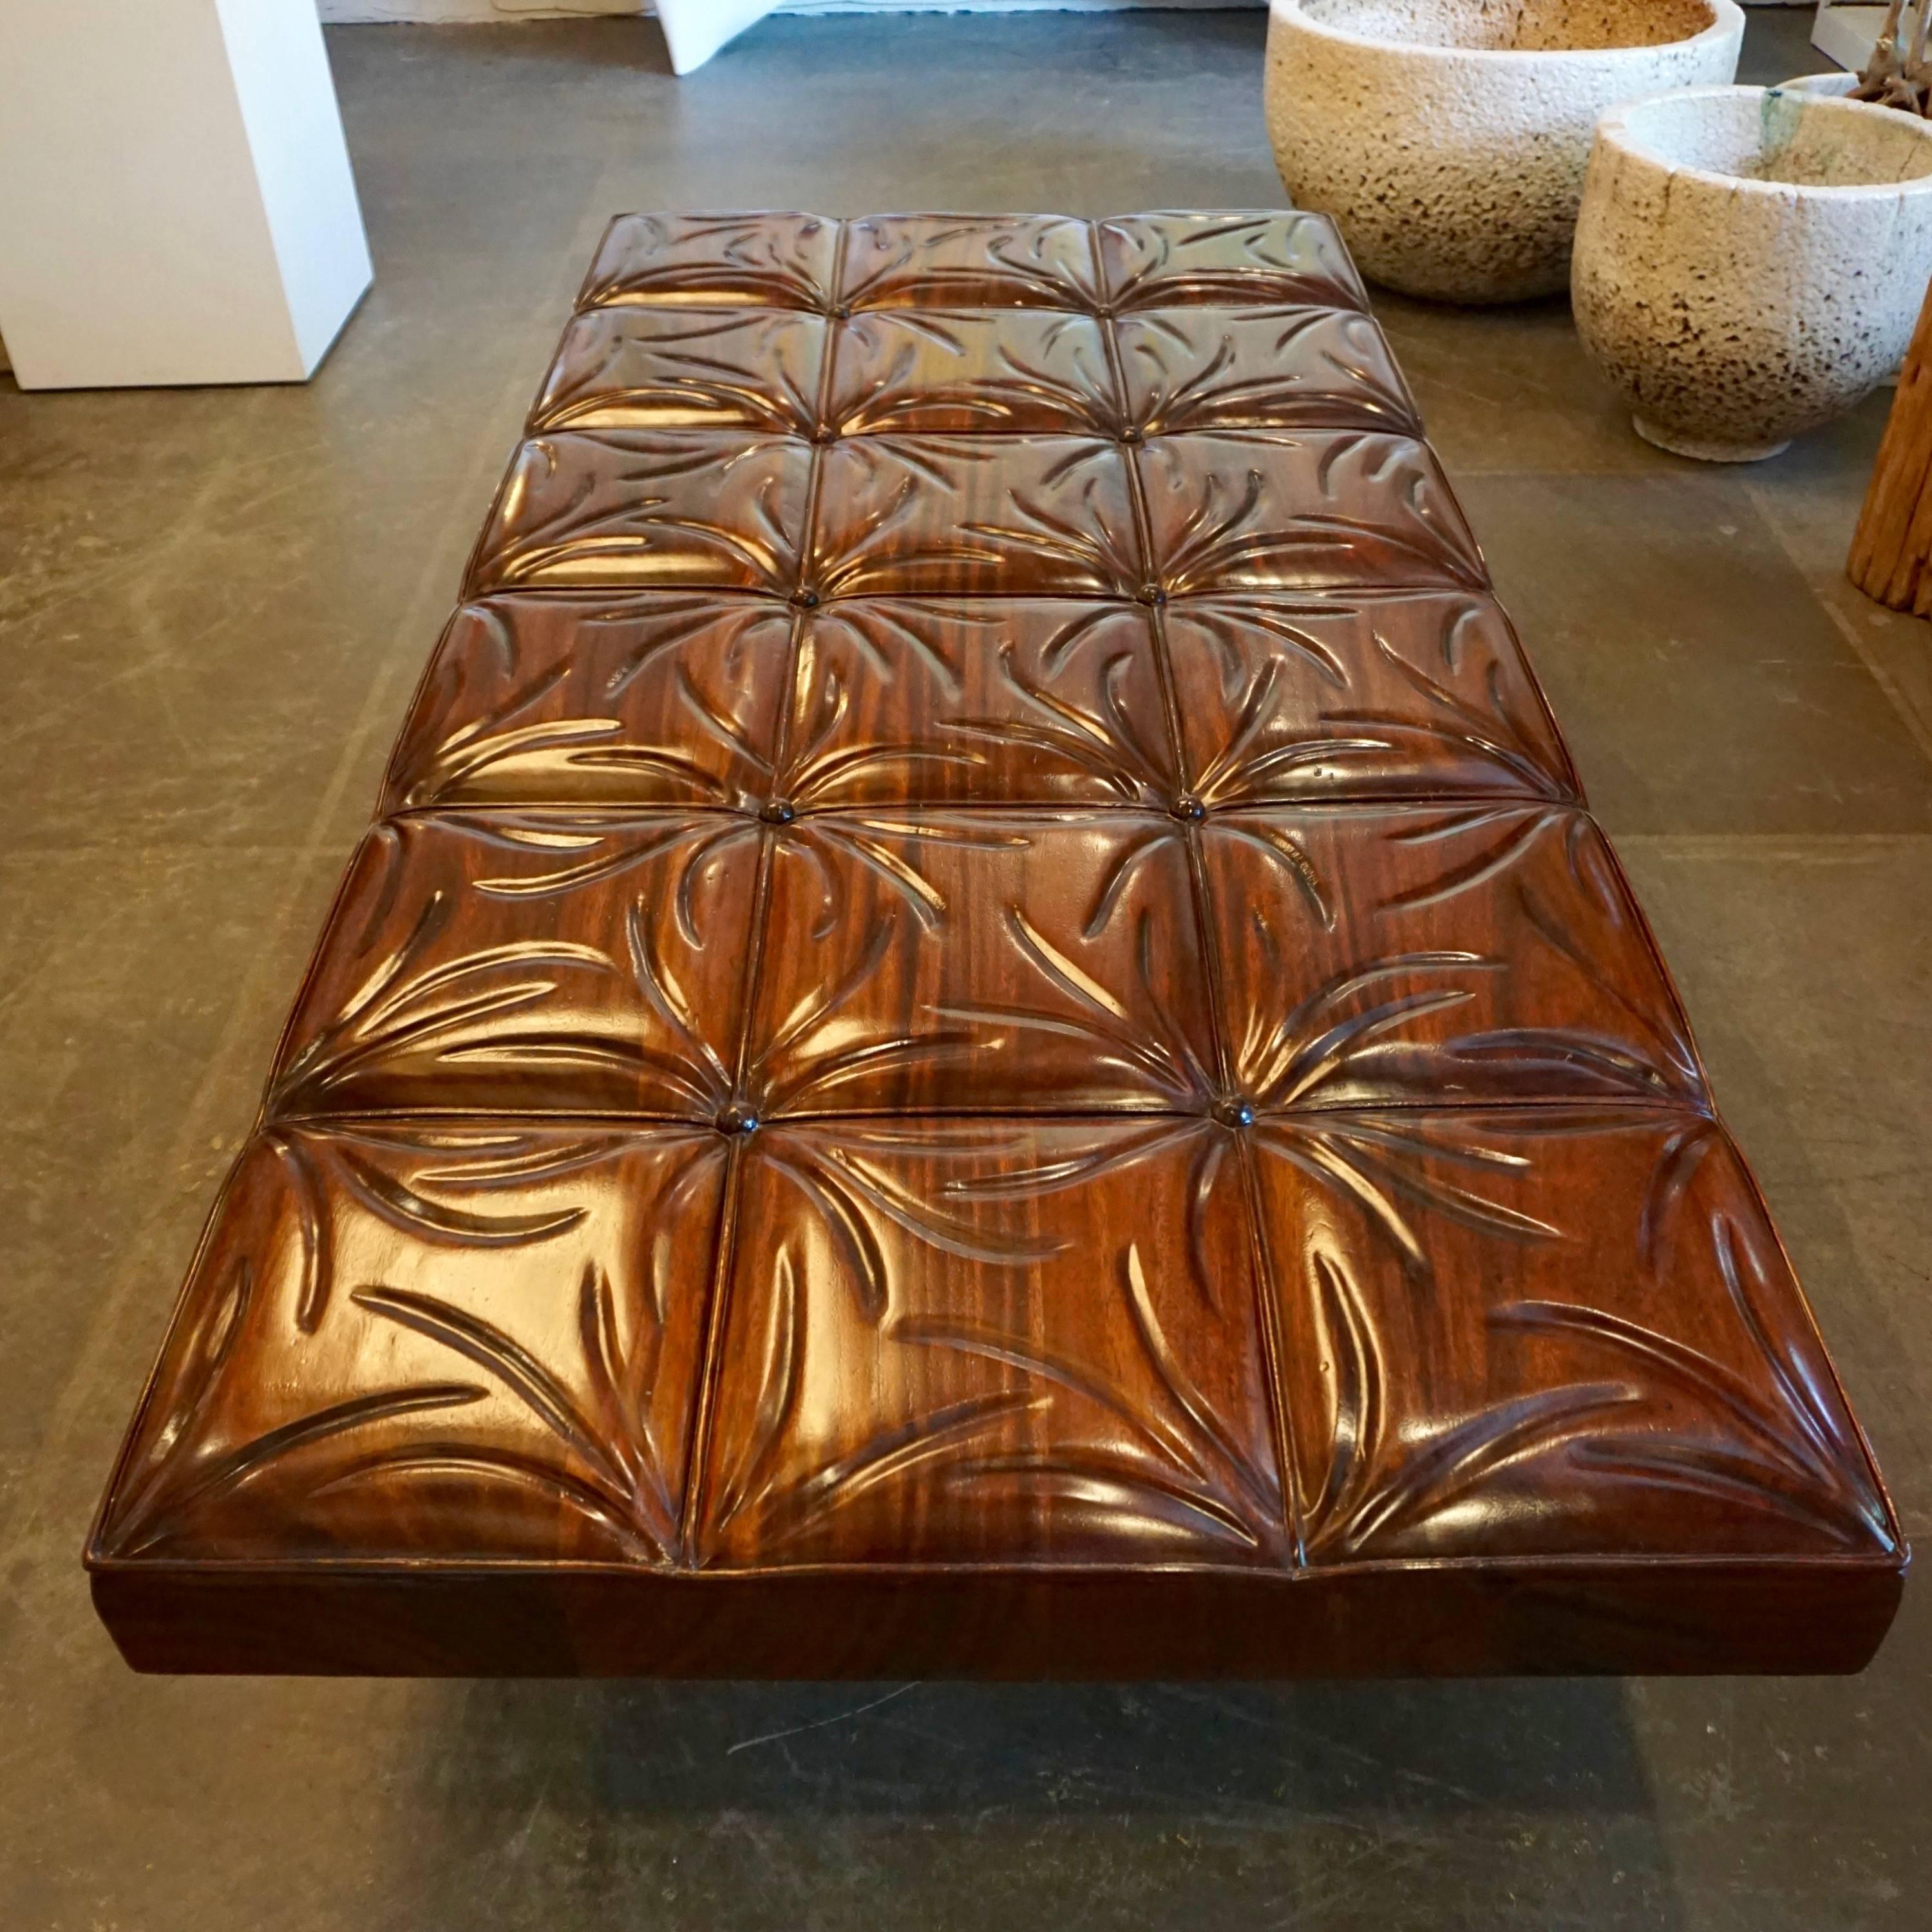 Carved from solid mahogany resembling a tufted leather bench including the buttons. Mounted on square chromed steel legs.